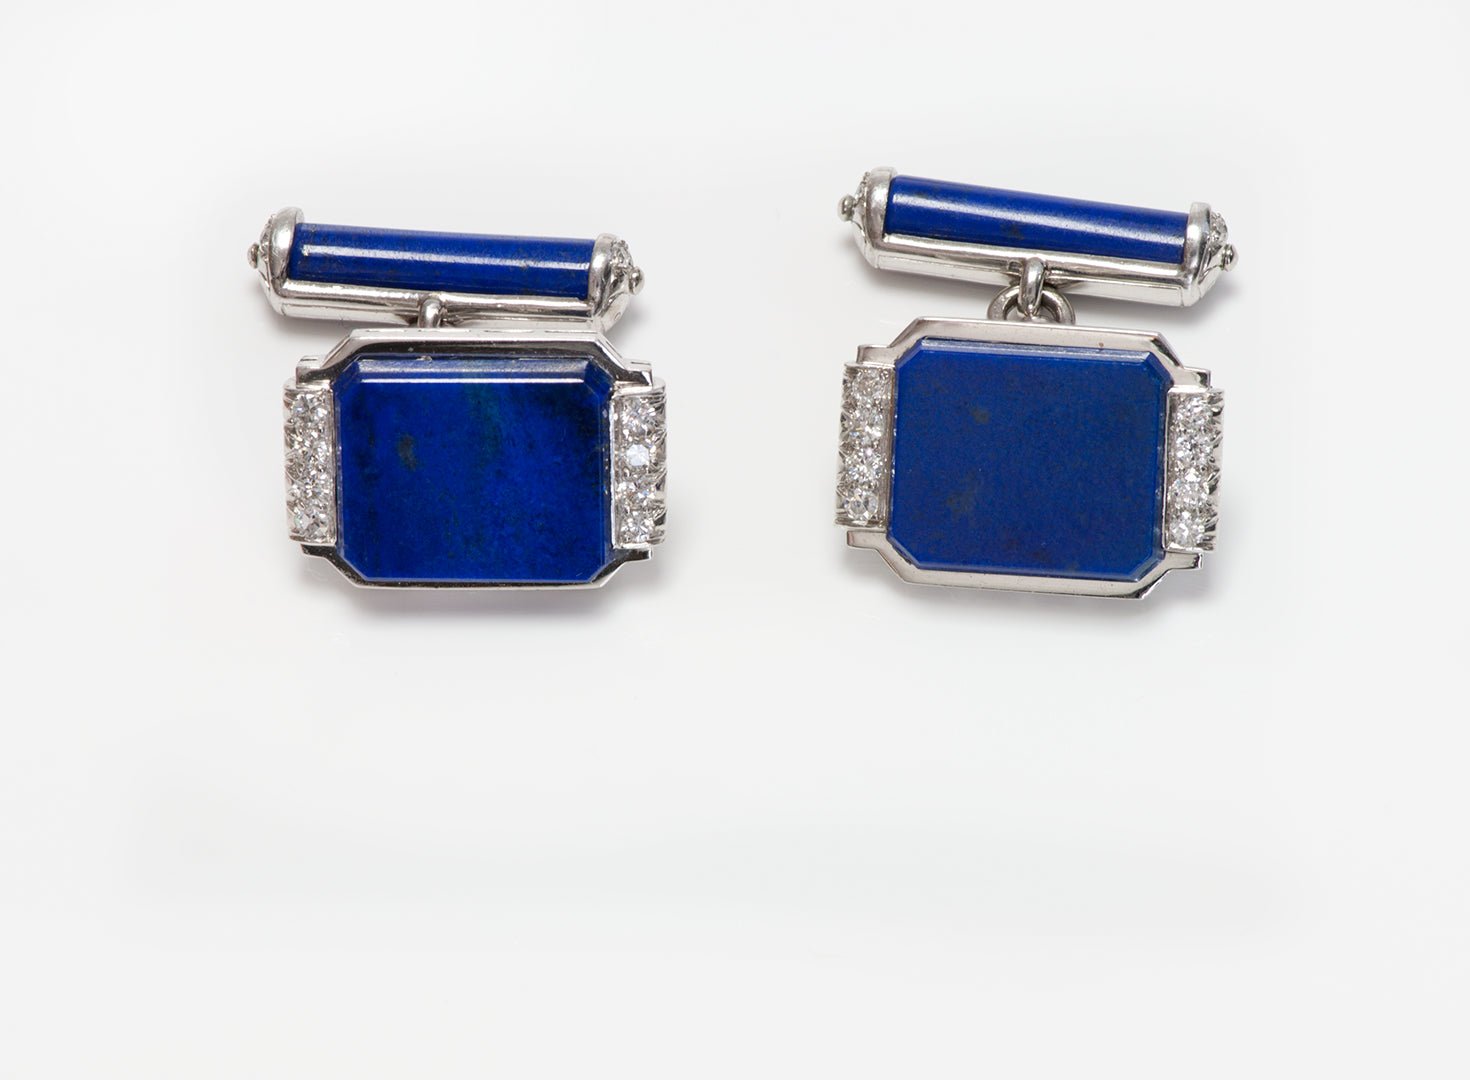 Vintage Gold & Silver Cufflinks, a Symbol of Elegance and Refinement - DSF Antique Jewelry